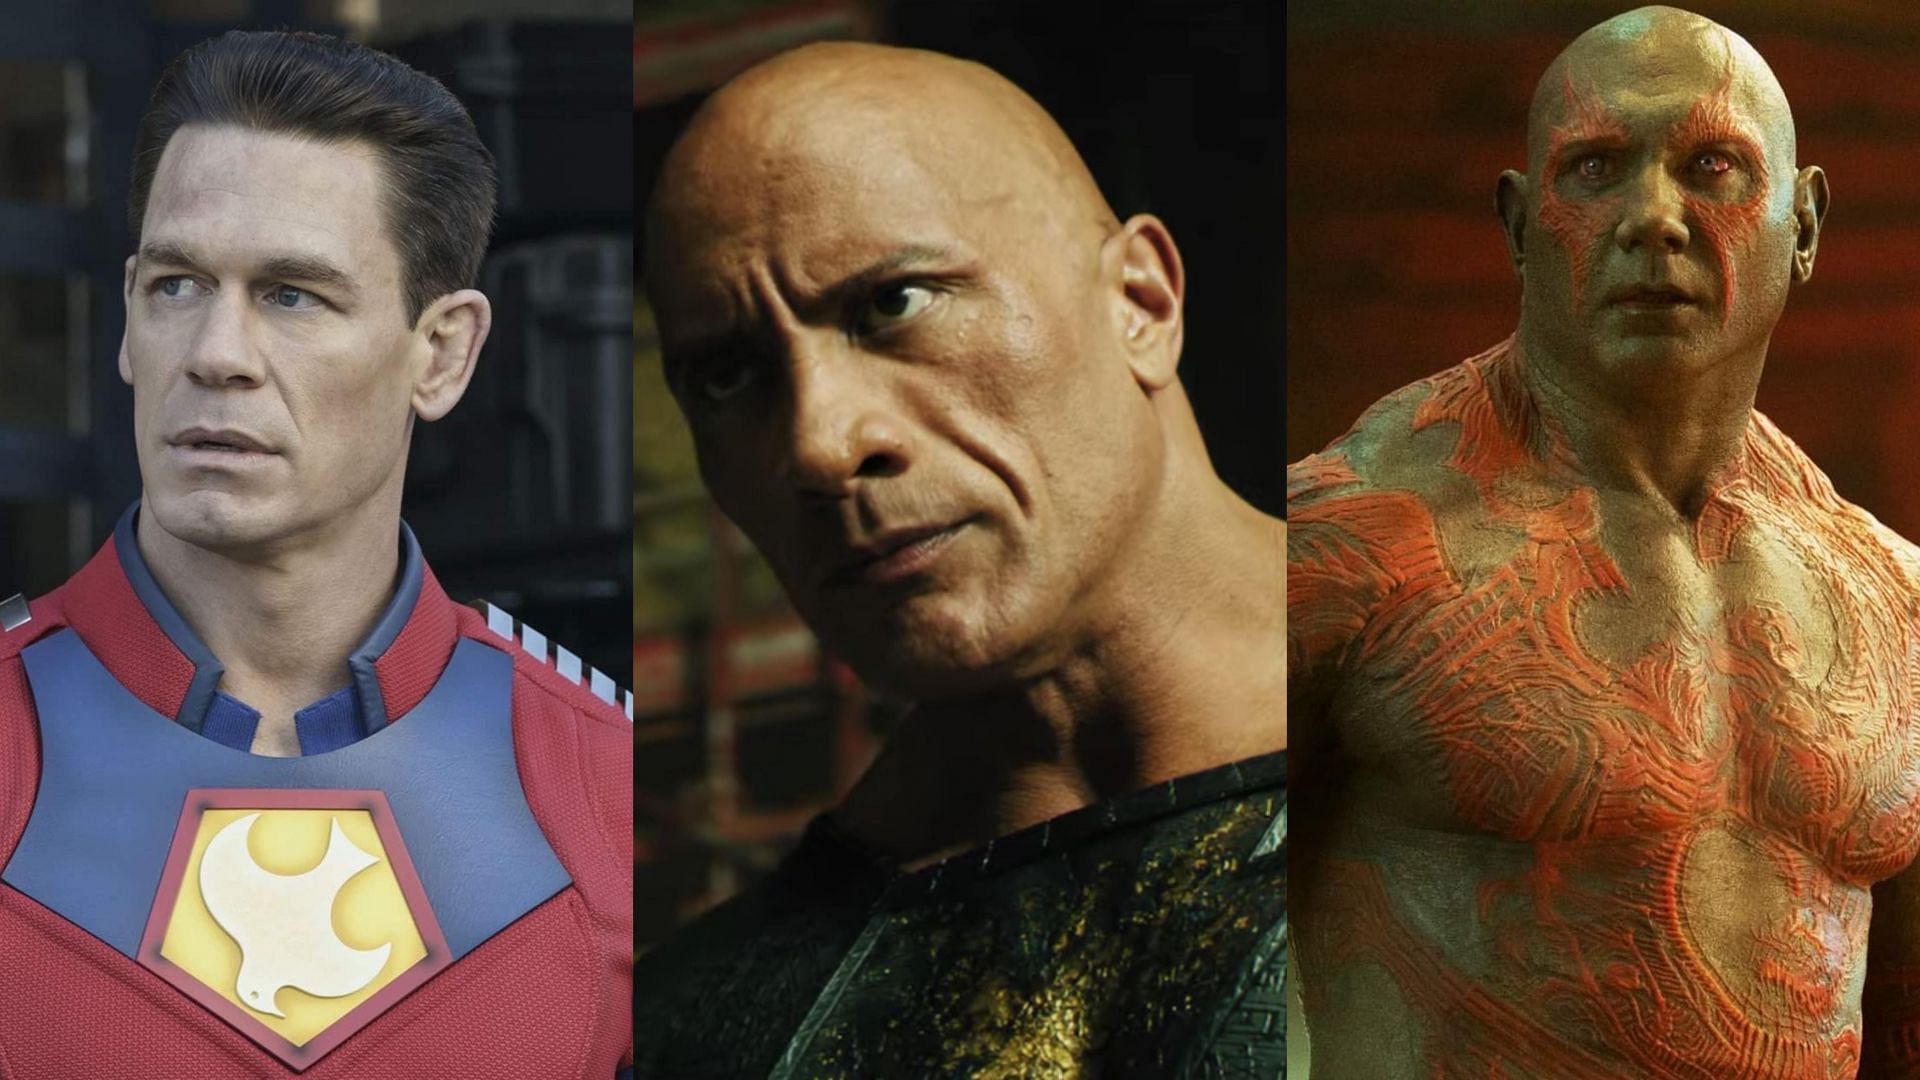 John Cena, The Rock and Batista are all huge Hollywood Stars.